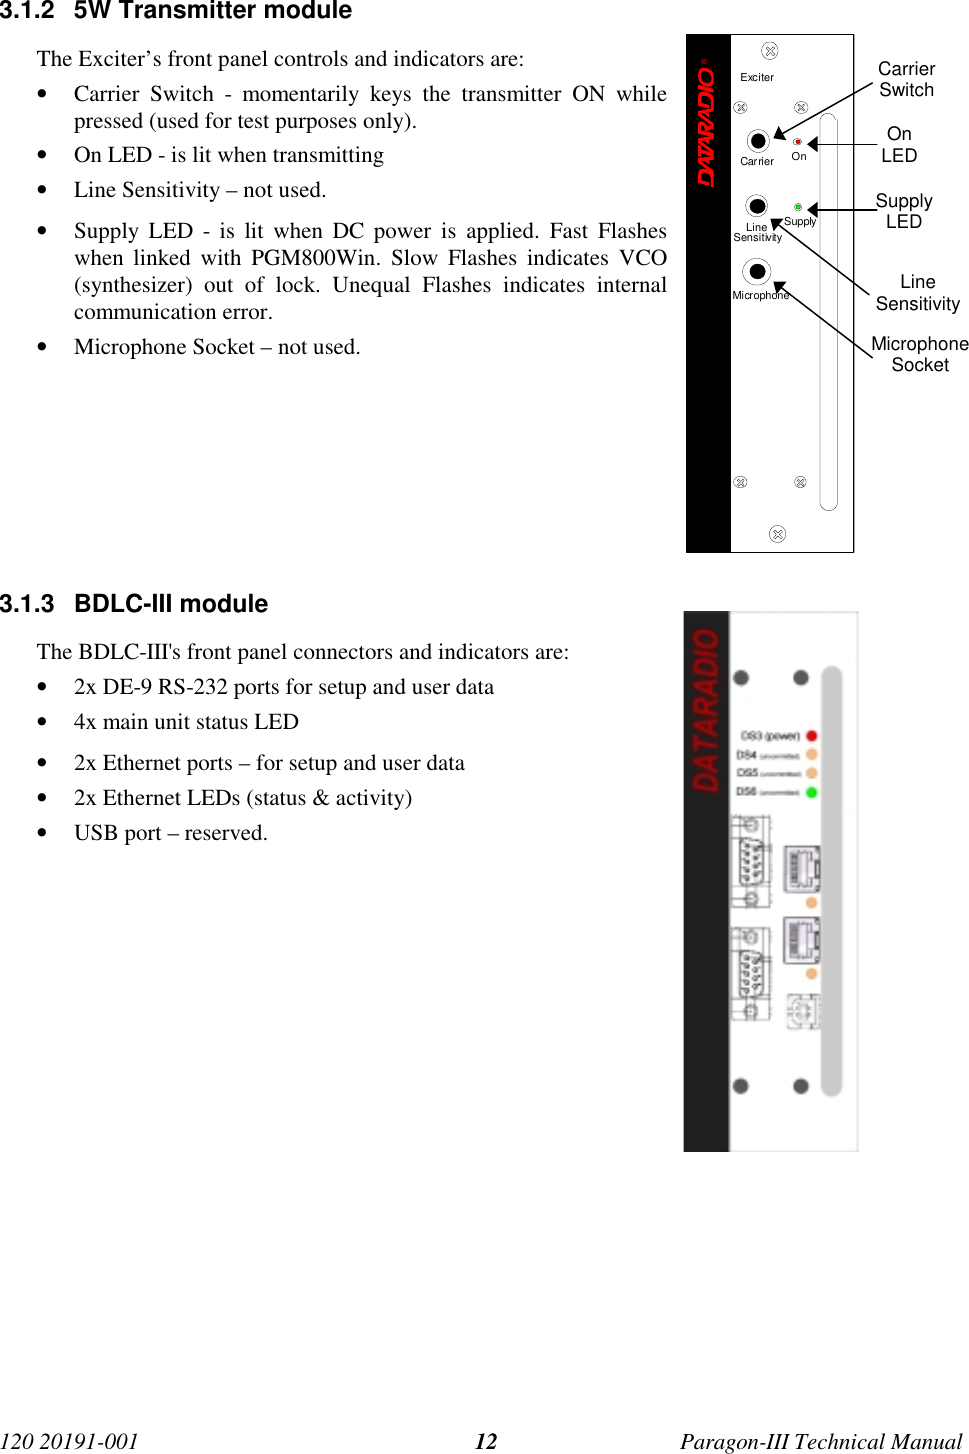 120 20191-001 Paragon-III Technical Manual123.1.2  5W Transmitter moduleThe Exciter’s front panel controls and indicators are:• Carrier Switch - momentarily keys the transmitter ON whilepressed (used for test purposes only).• On LED - is lit when transmitting• Line Sensitivity – not used.• Supply LED - is lit when DC power is applied. Fast Flasheswhen linked with PGM800Win. Slow Flashes indicates VCO(synthesizer) out of lock. Unequal Flashes indicates internalcommunication error.• Microphone Socket – not used.3.1.3 BDLC-III moduleThe BDLC-III&apos;s front panel connectors and indicators are:• 2x DE-9 RS-232 ports for setup and user data• 4x main unit status LED• 2x Ethernet ports – for setup and user data• 2x Ethernet LEDs (status &amp; activity)• USB port – reserved.CarrierSwitchOnLEDSupplyLEDLineSensitivityMicrophoneSocket®ExciterCarrier OnLineSensitivitySupplyMicrophone